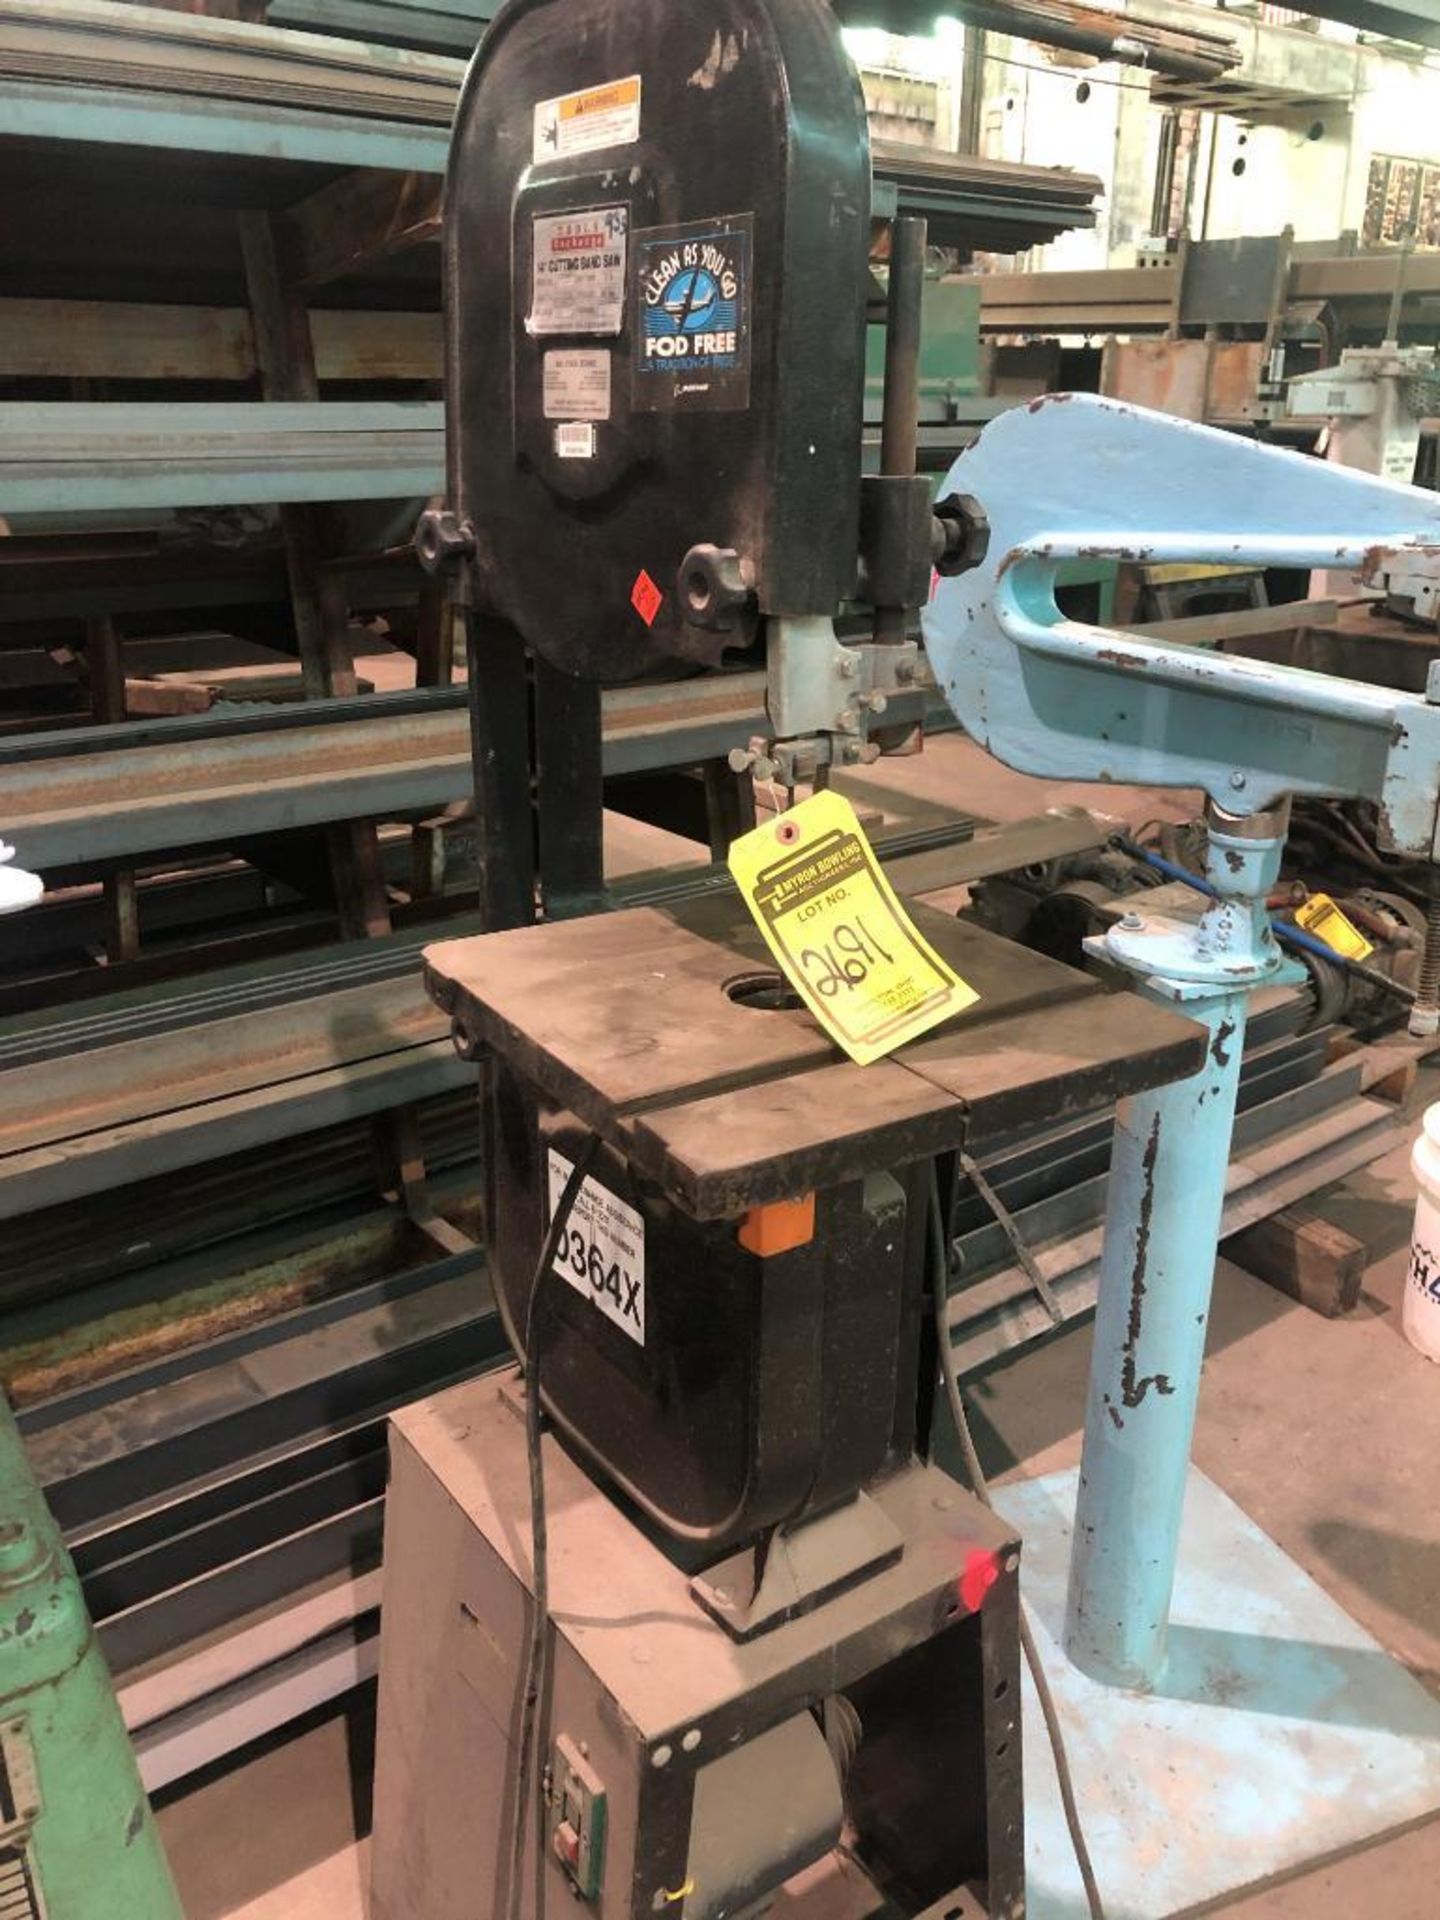 Tool Exchange 14" Cutting Band Saw, Model 63020, Volts 115/230, S/N 1116700 - Image 2 of 3